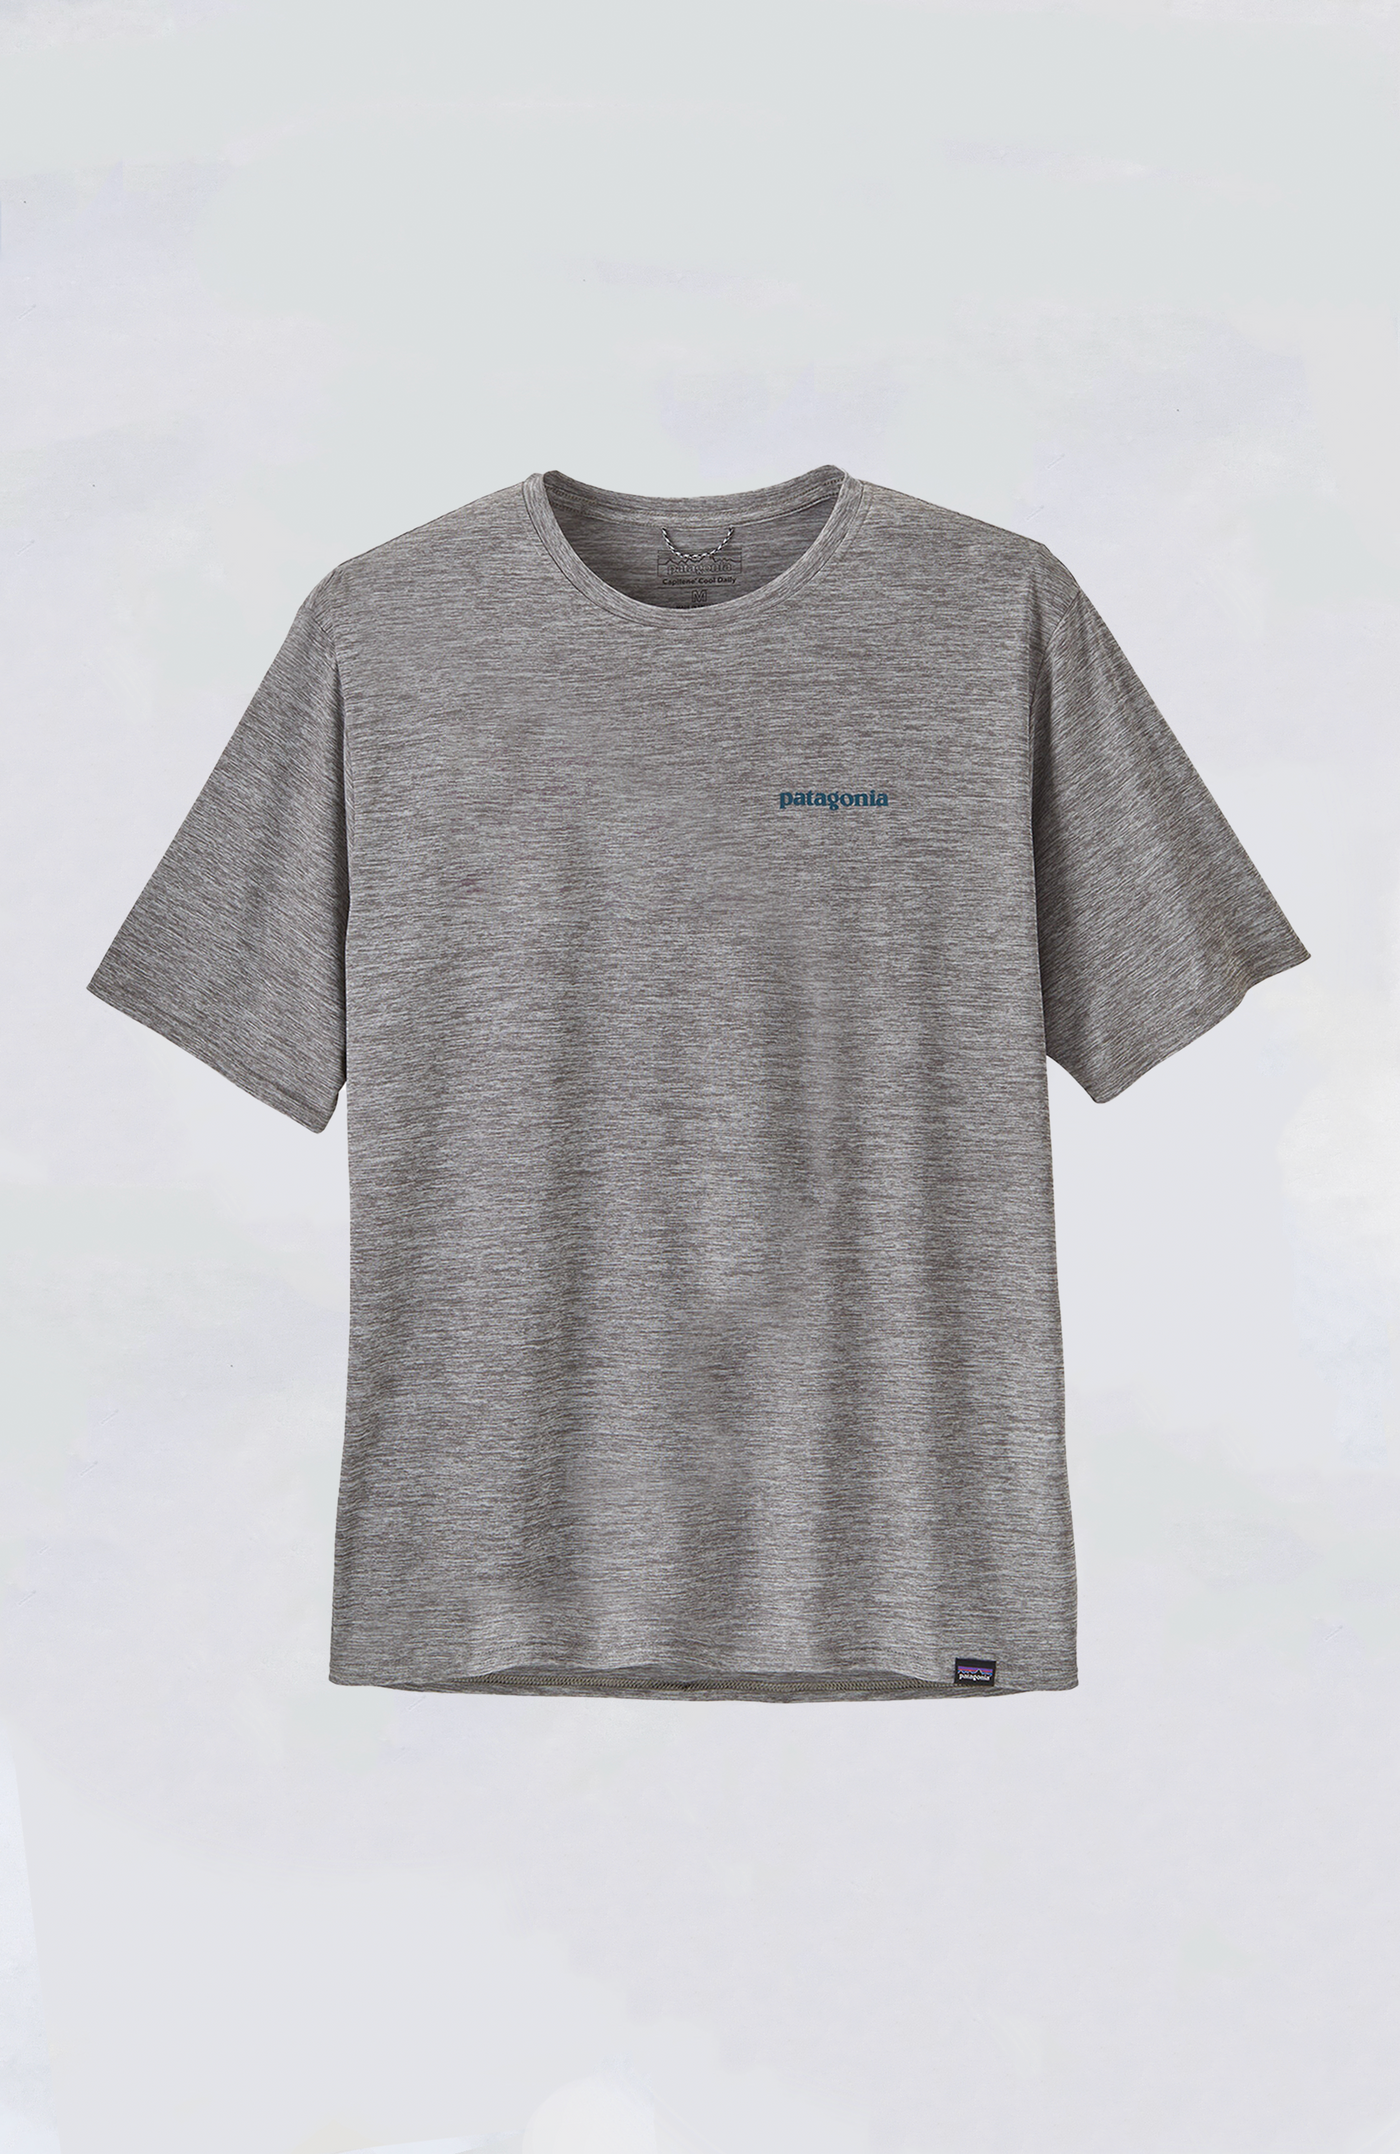 Patagonia Tee - M's Cap Cool Daily Graphic Shirt - Waters